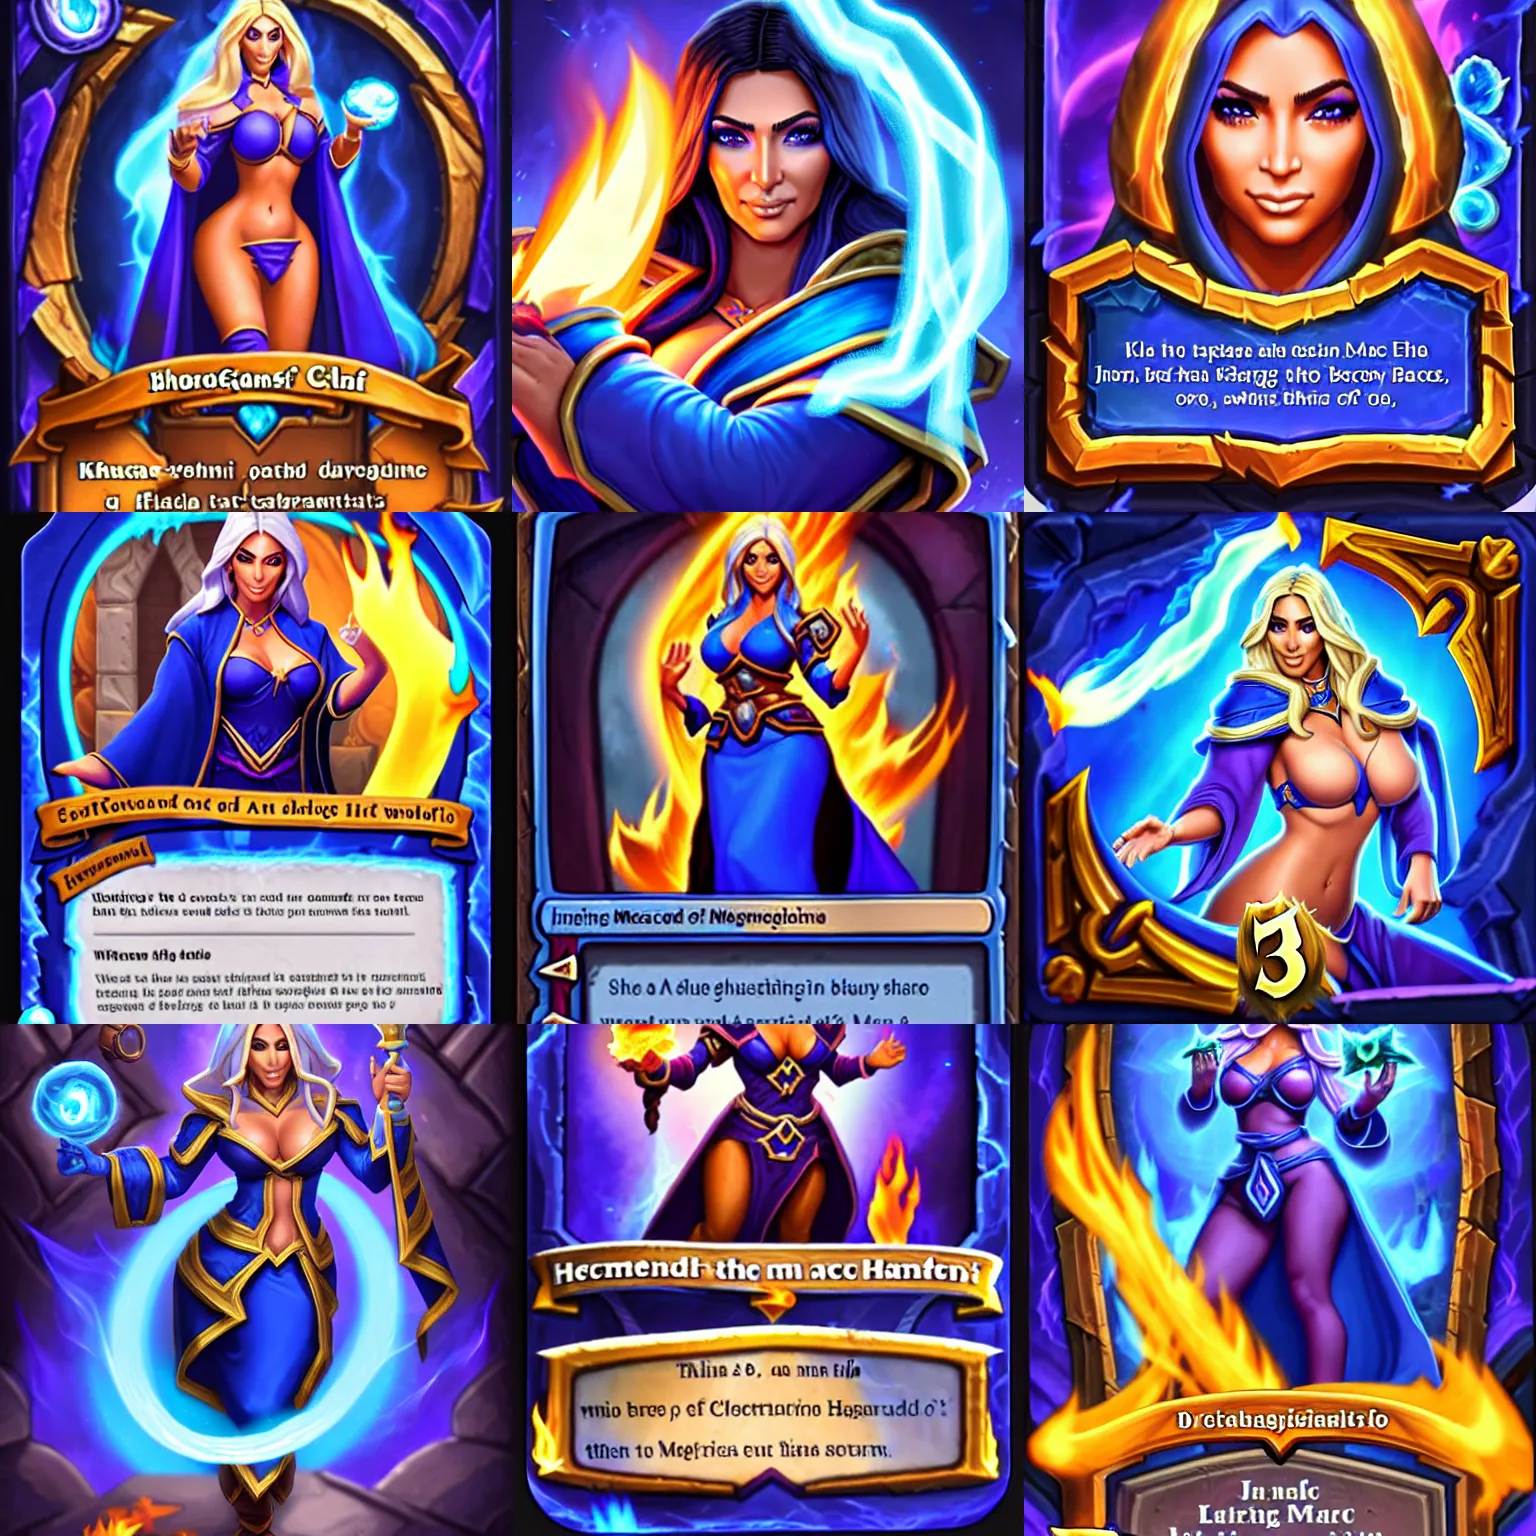 Prompt: Who : a mage with a blue robe casting a fire ball ; Face and hair : Jaina ; Body type : Kim Kardashian ; Safe clothes : yes ; Frame : no ; IMPORTANT : Hearthstone official splash art, award winning, trending in category Epic